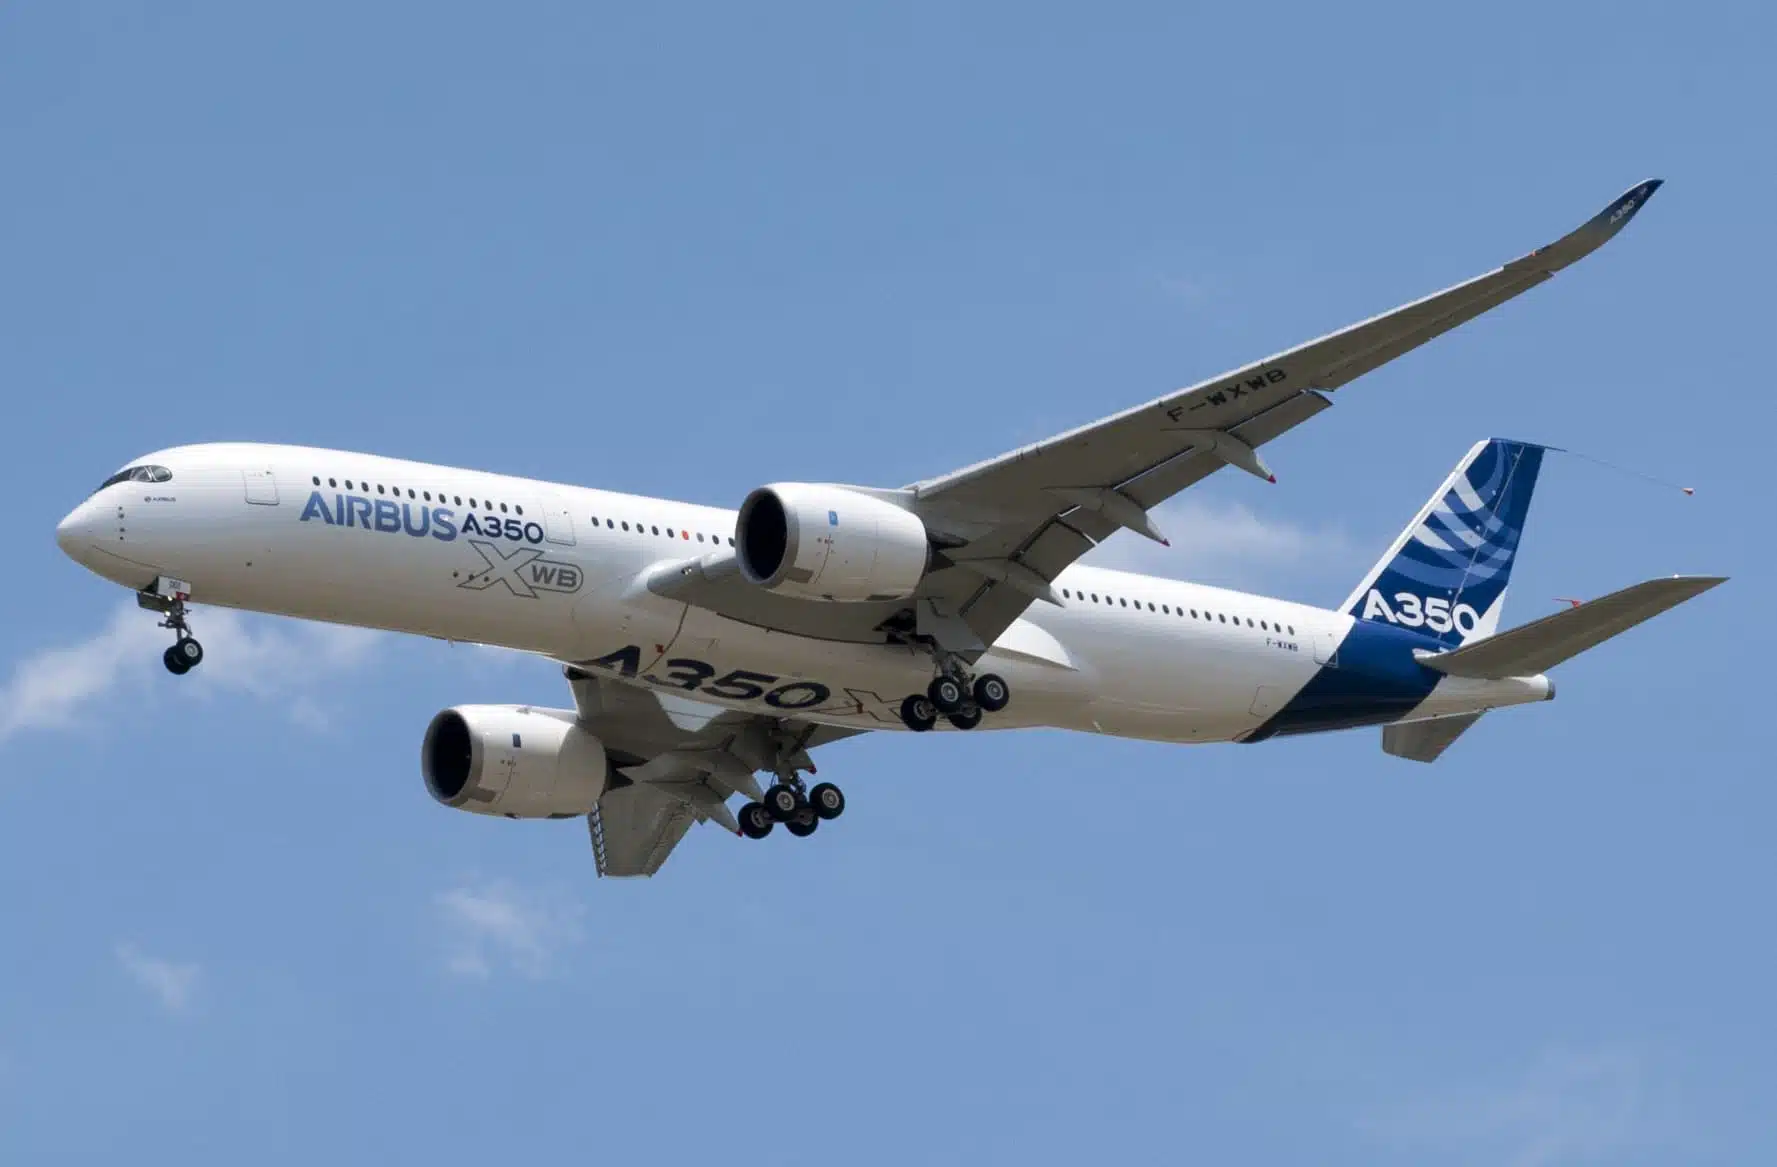 EASA issues AD to address unsafe conditions with Airbus A350 lavatories